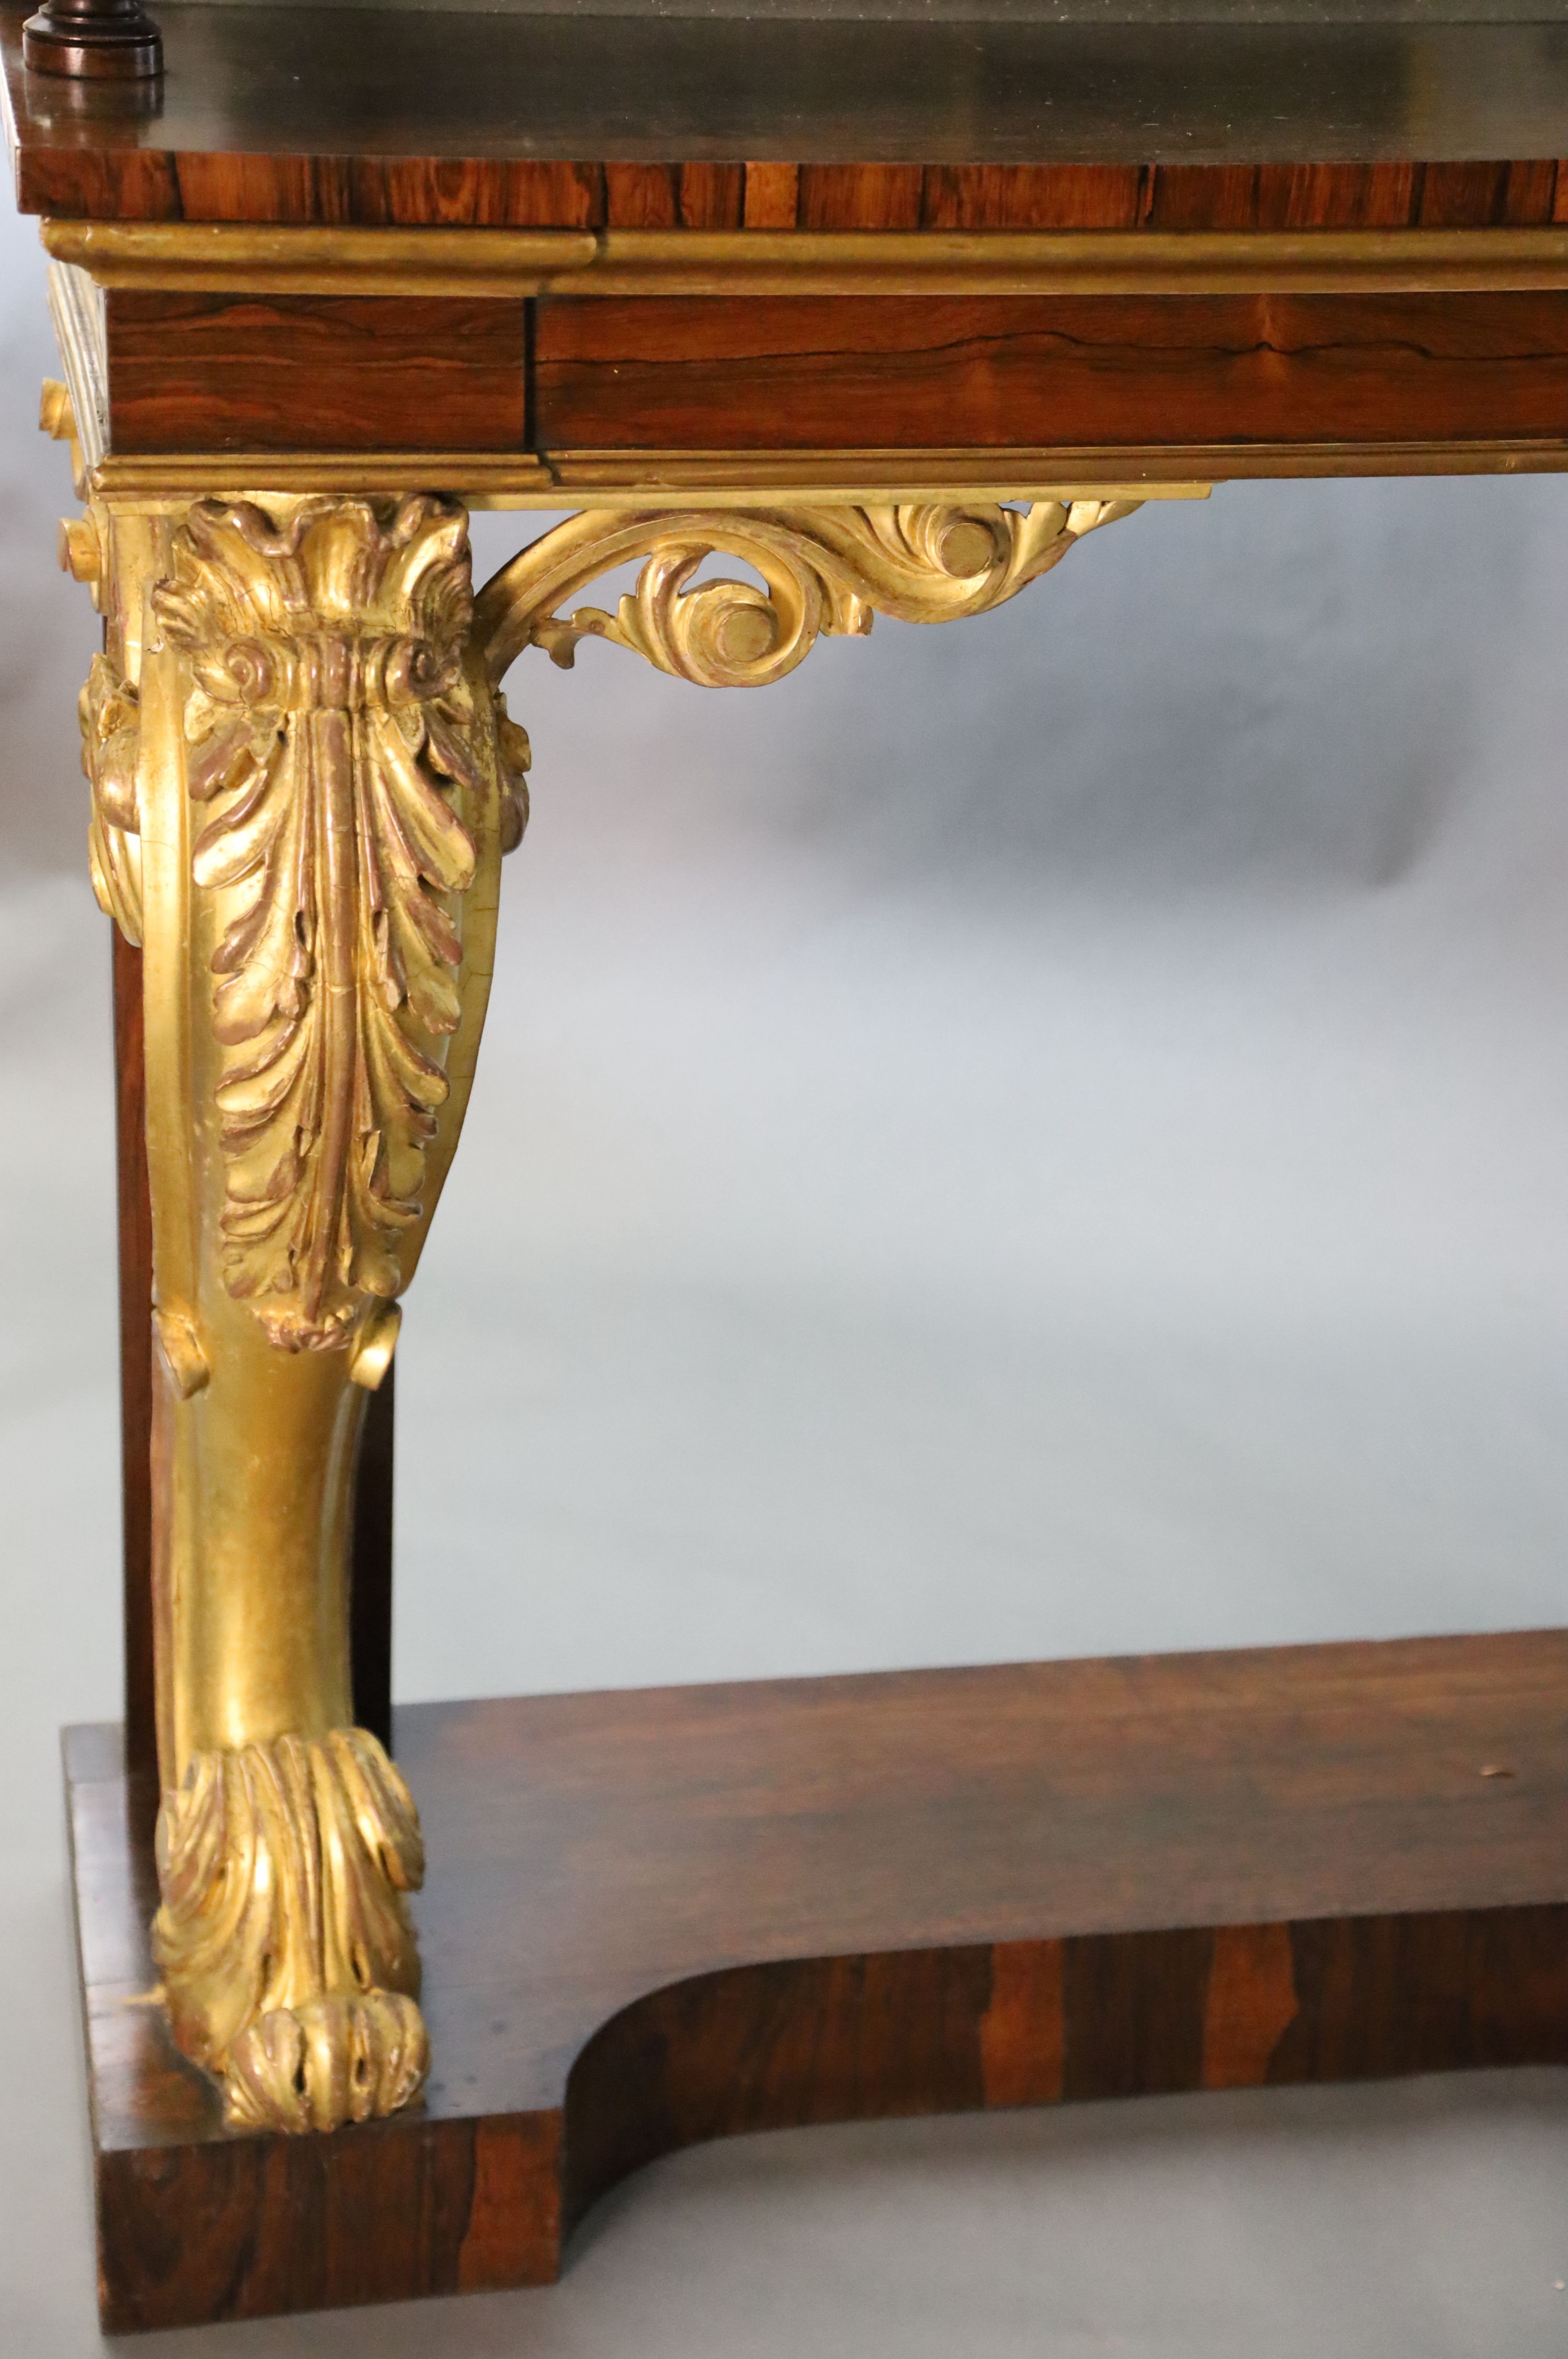 A pair of William IV parcel gilt rosewood console tables, W.8ft 2in. D.1ft 4in. H.4ft 4in.